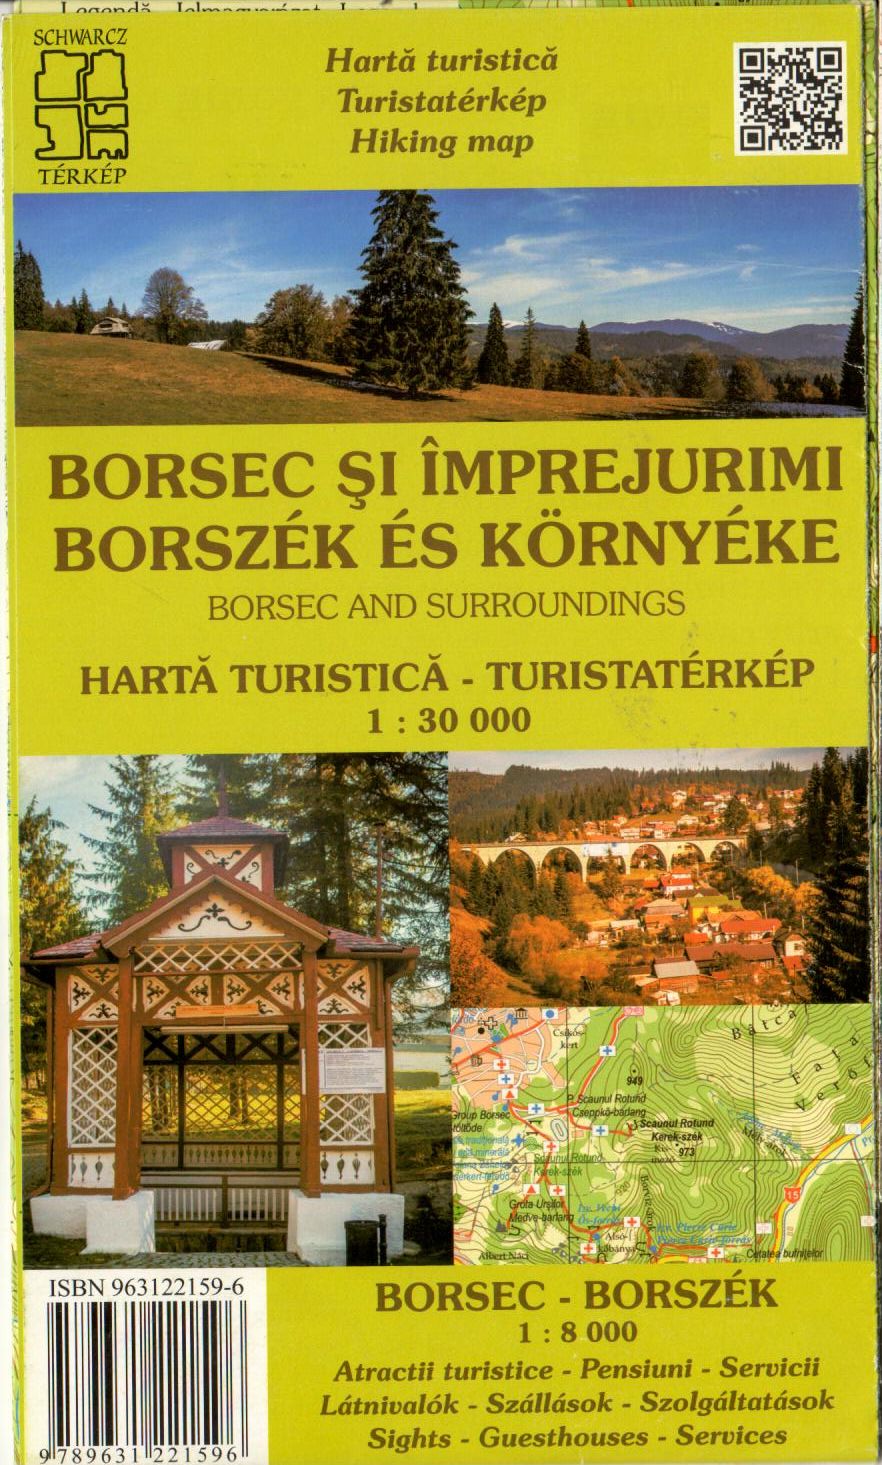 With a city map of Borsec 1:8.000 